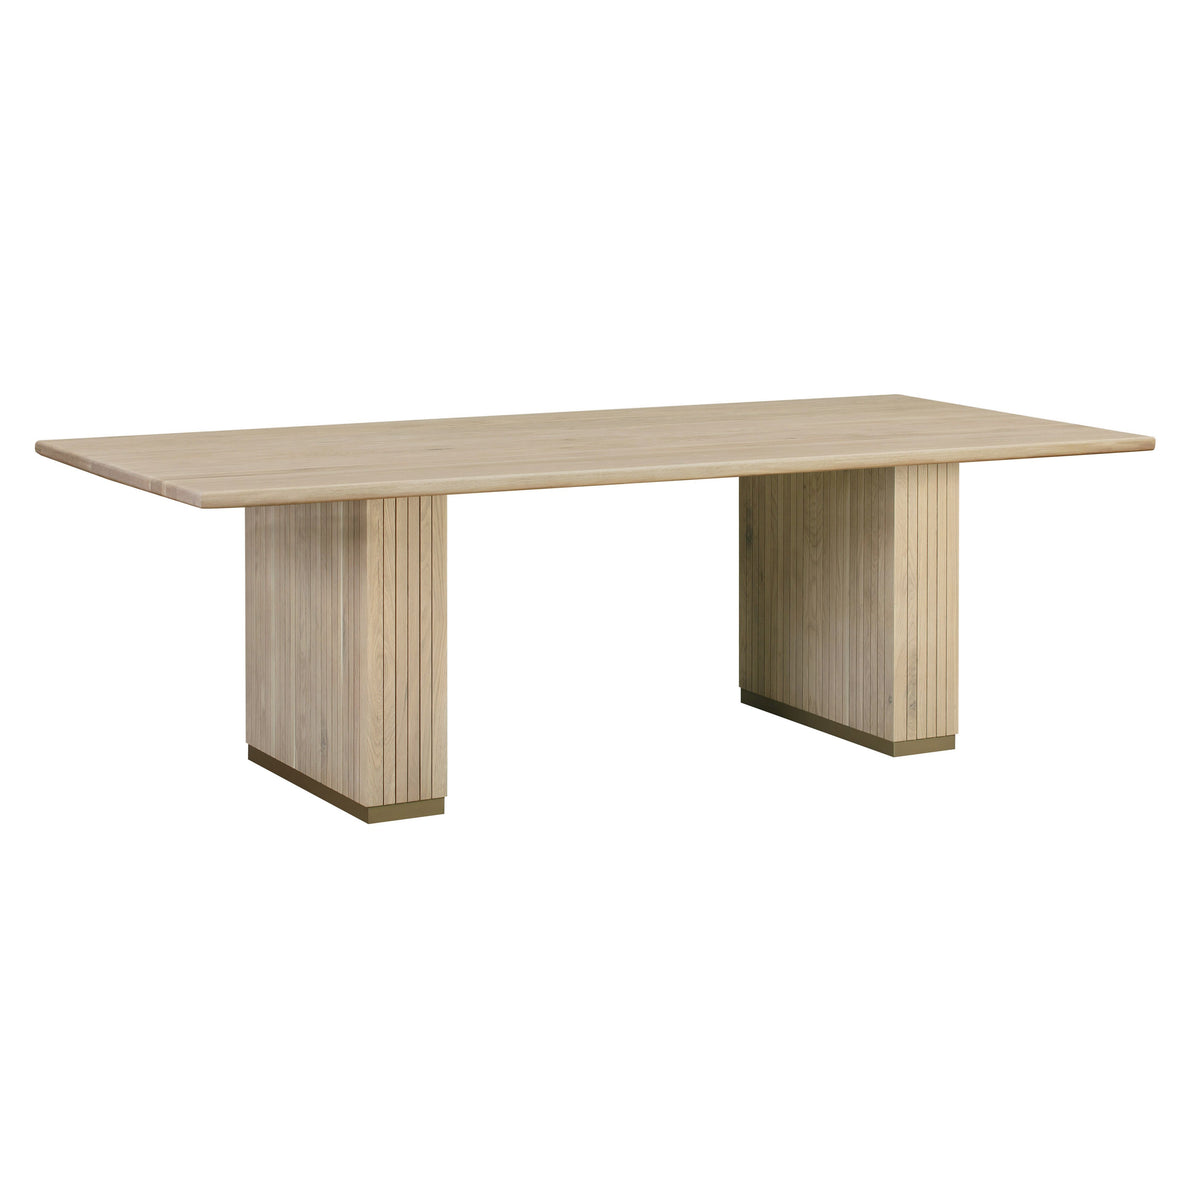 Chelsea Ash Wood Rectangular Dining Table Brown - Be Bold Furniture